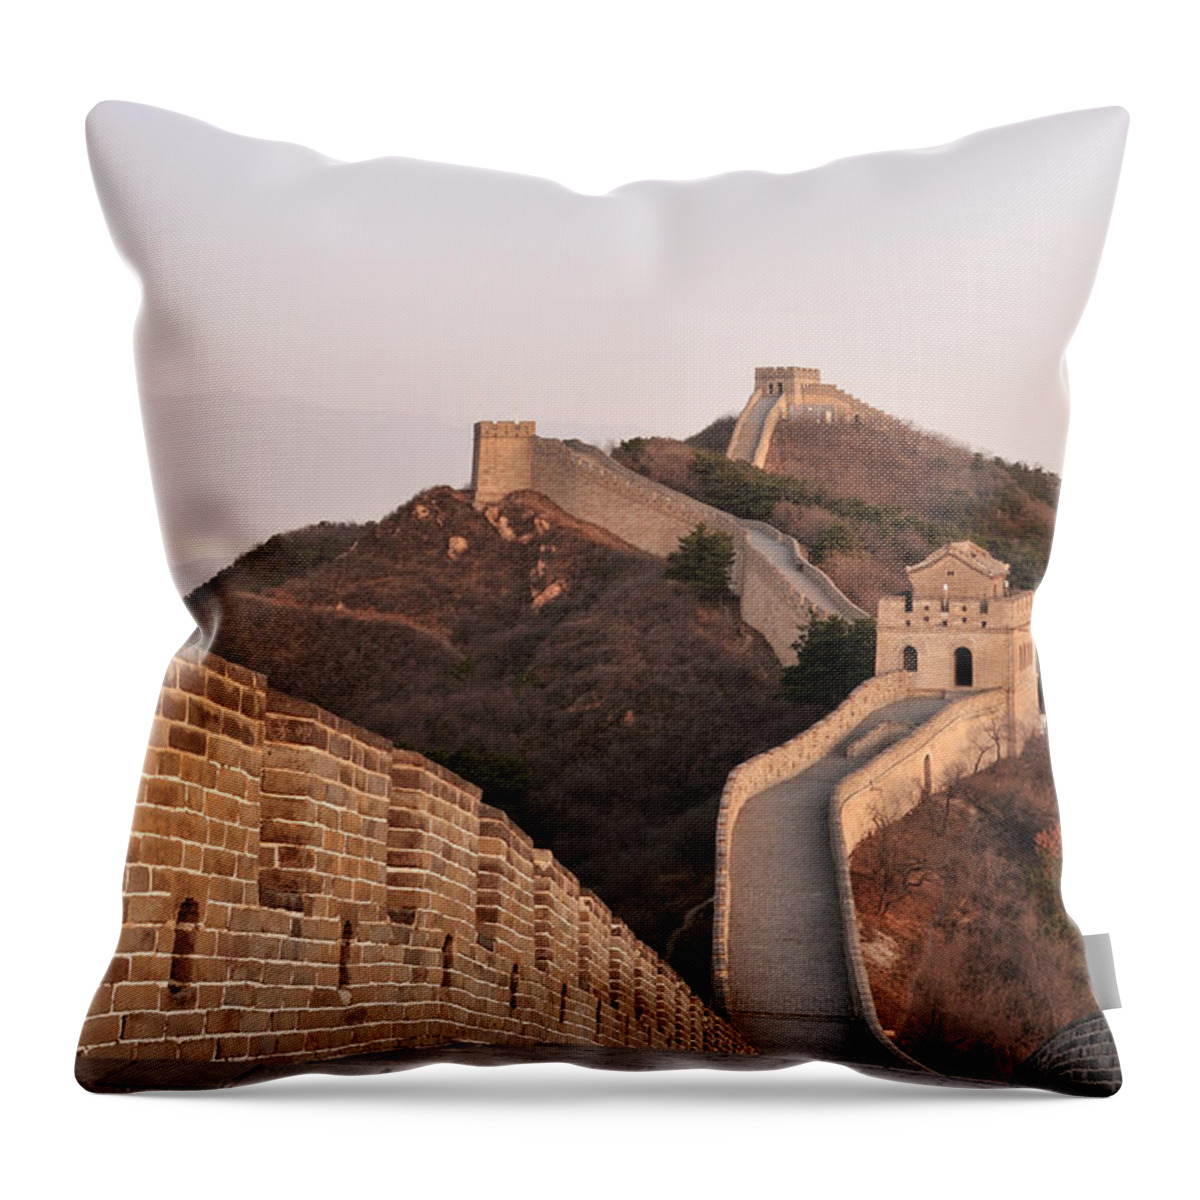 Tranquility Throw Pillow featuring the photograph The Great Wall Of China by Huang Xin